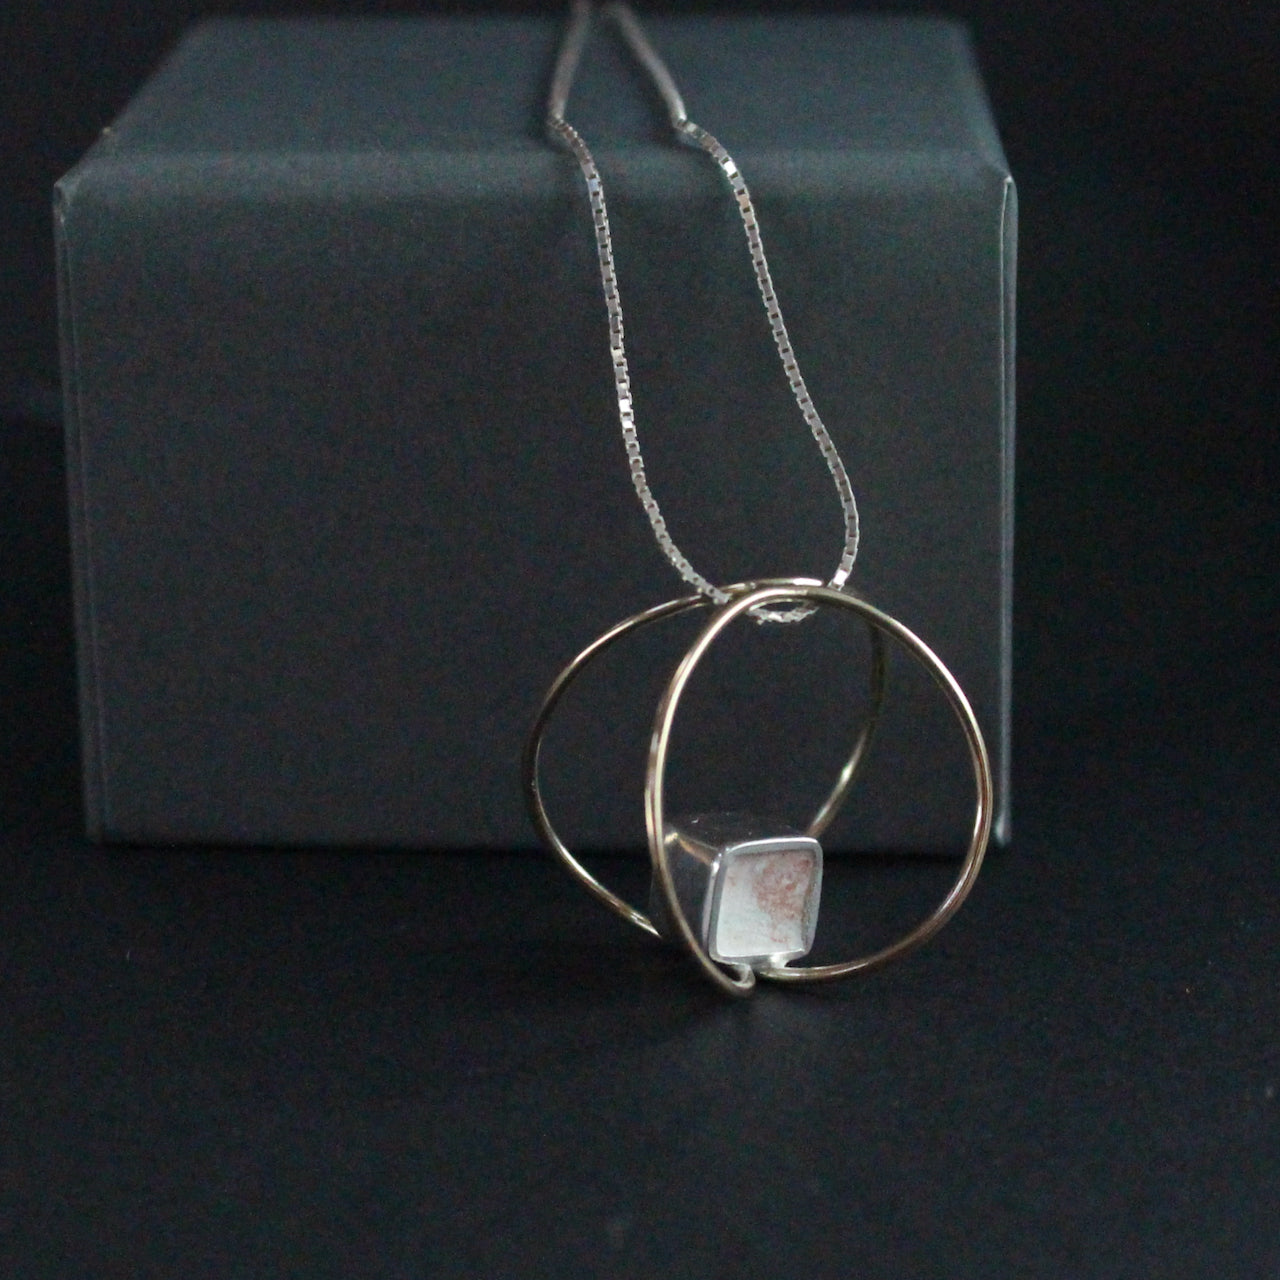 9ct gold and silver link pendant by artist Amy Stringer